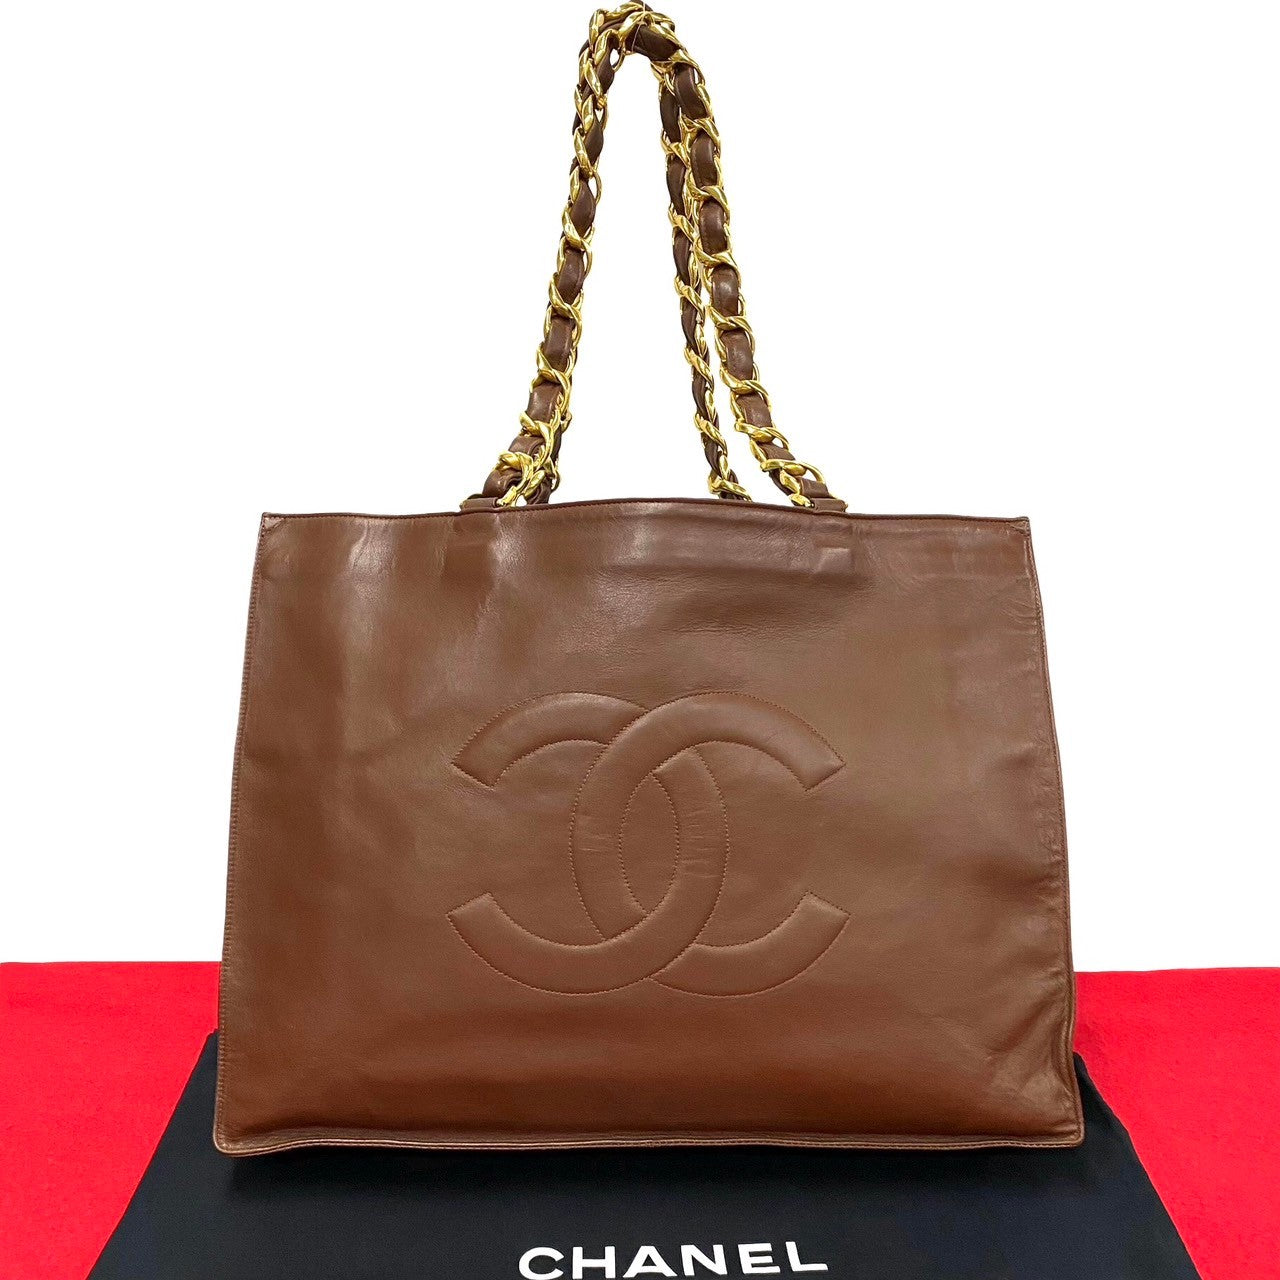 Chanel Coco Mark Tote Bag Leather Tote Bag 08458 in Good condition